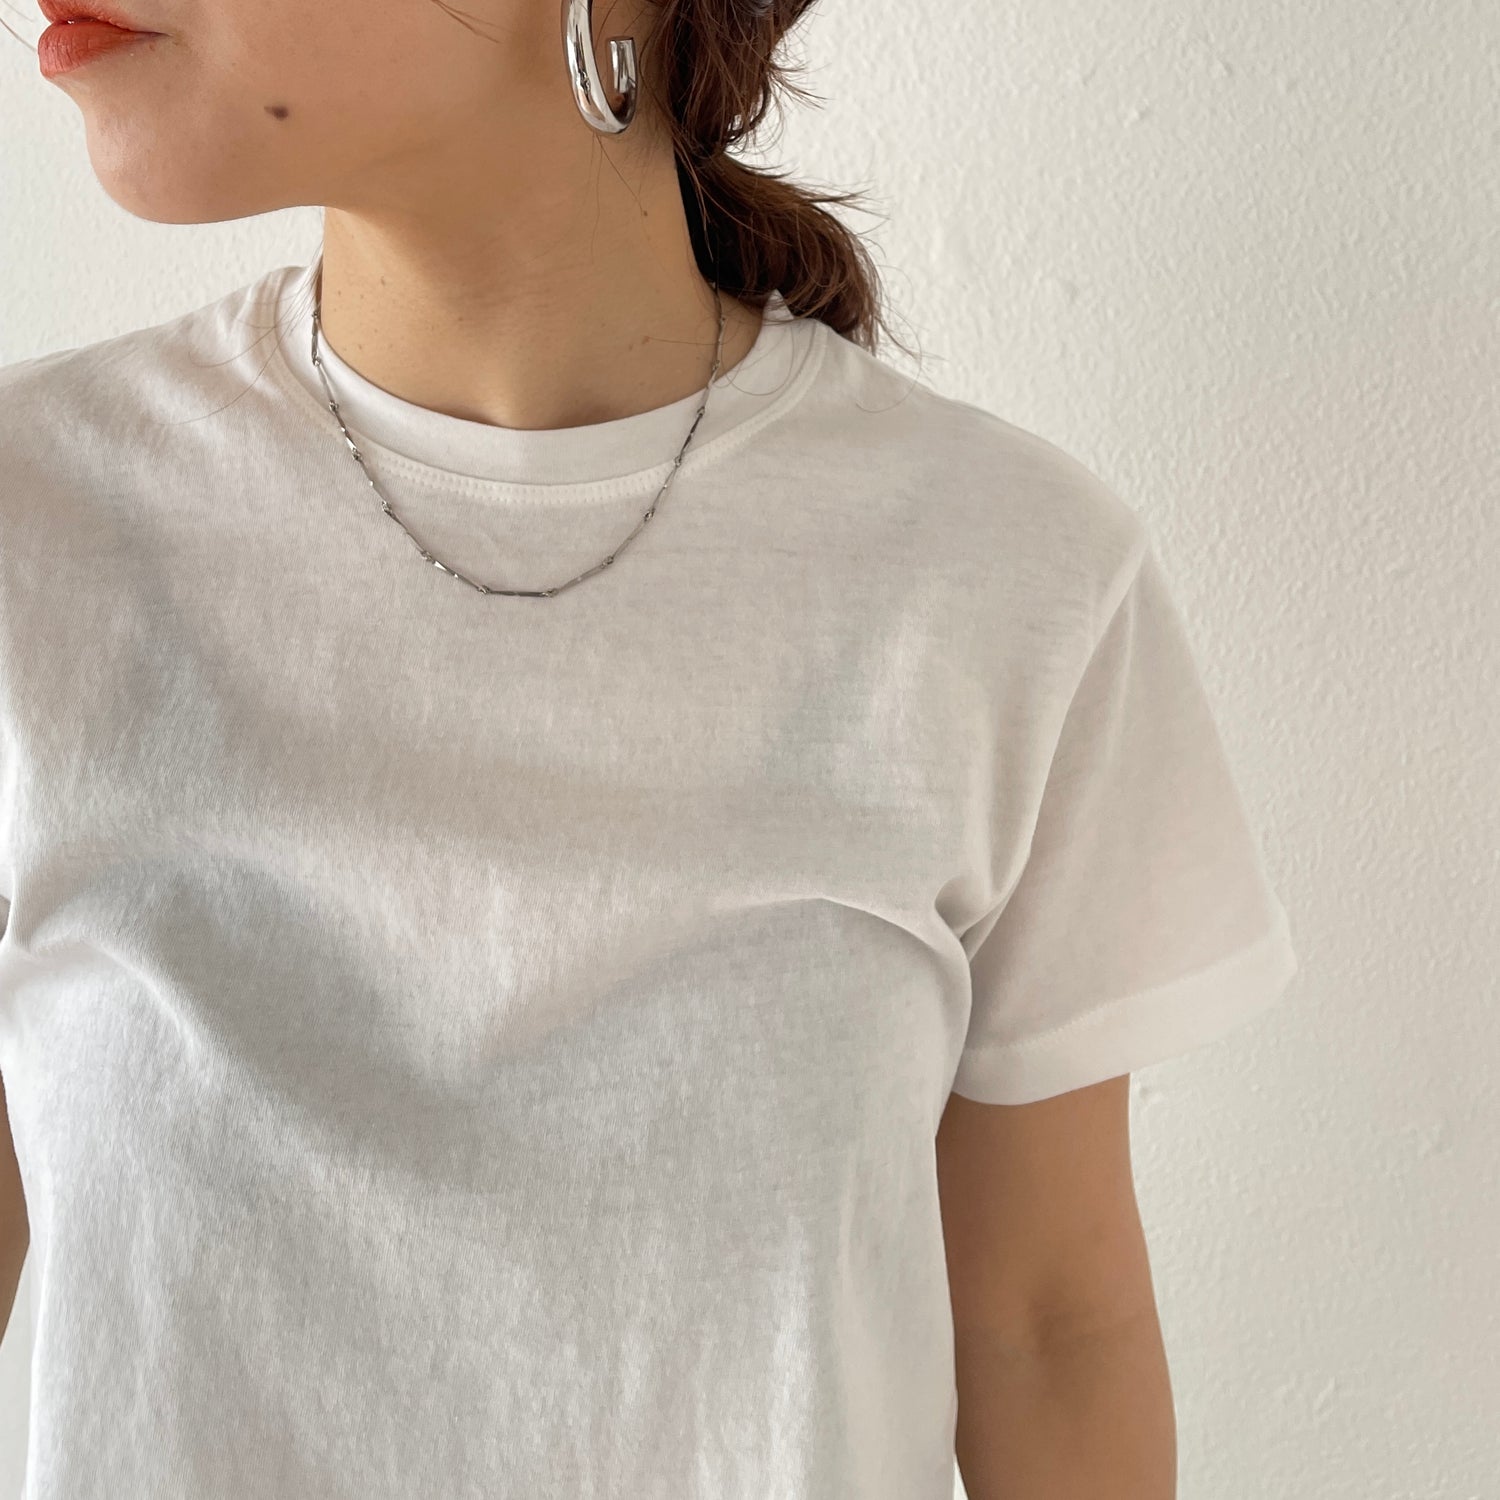 daily daily compact tee / ivory